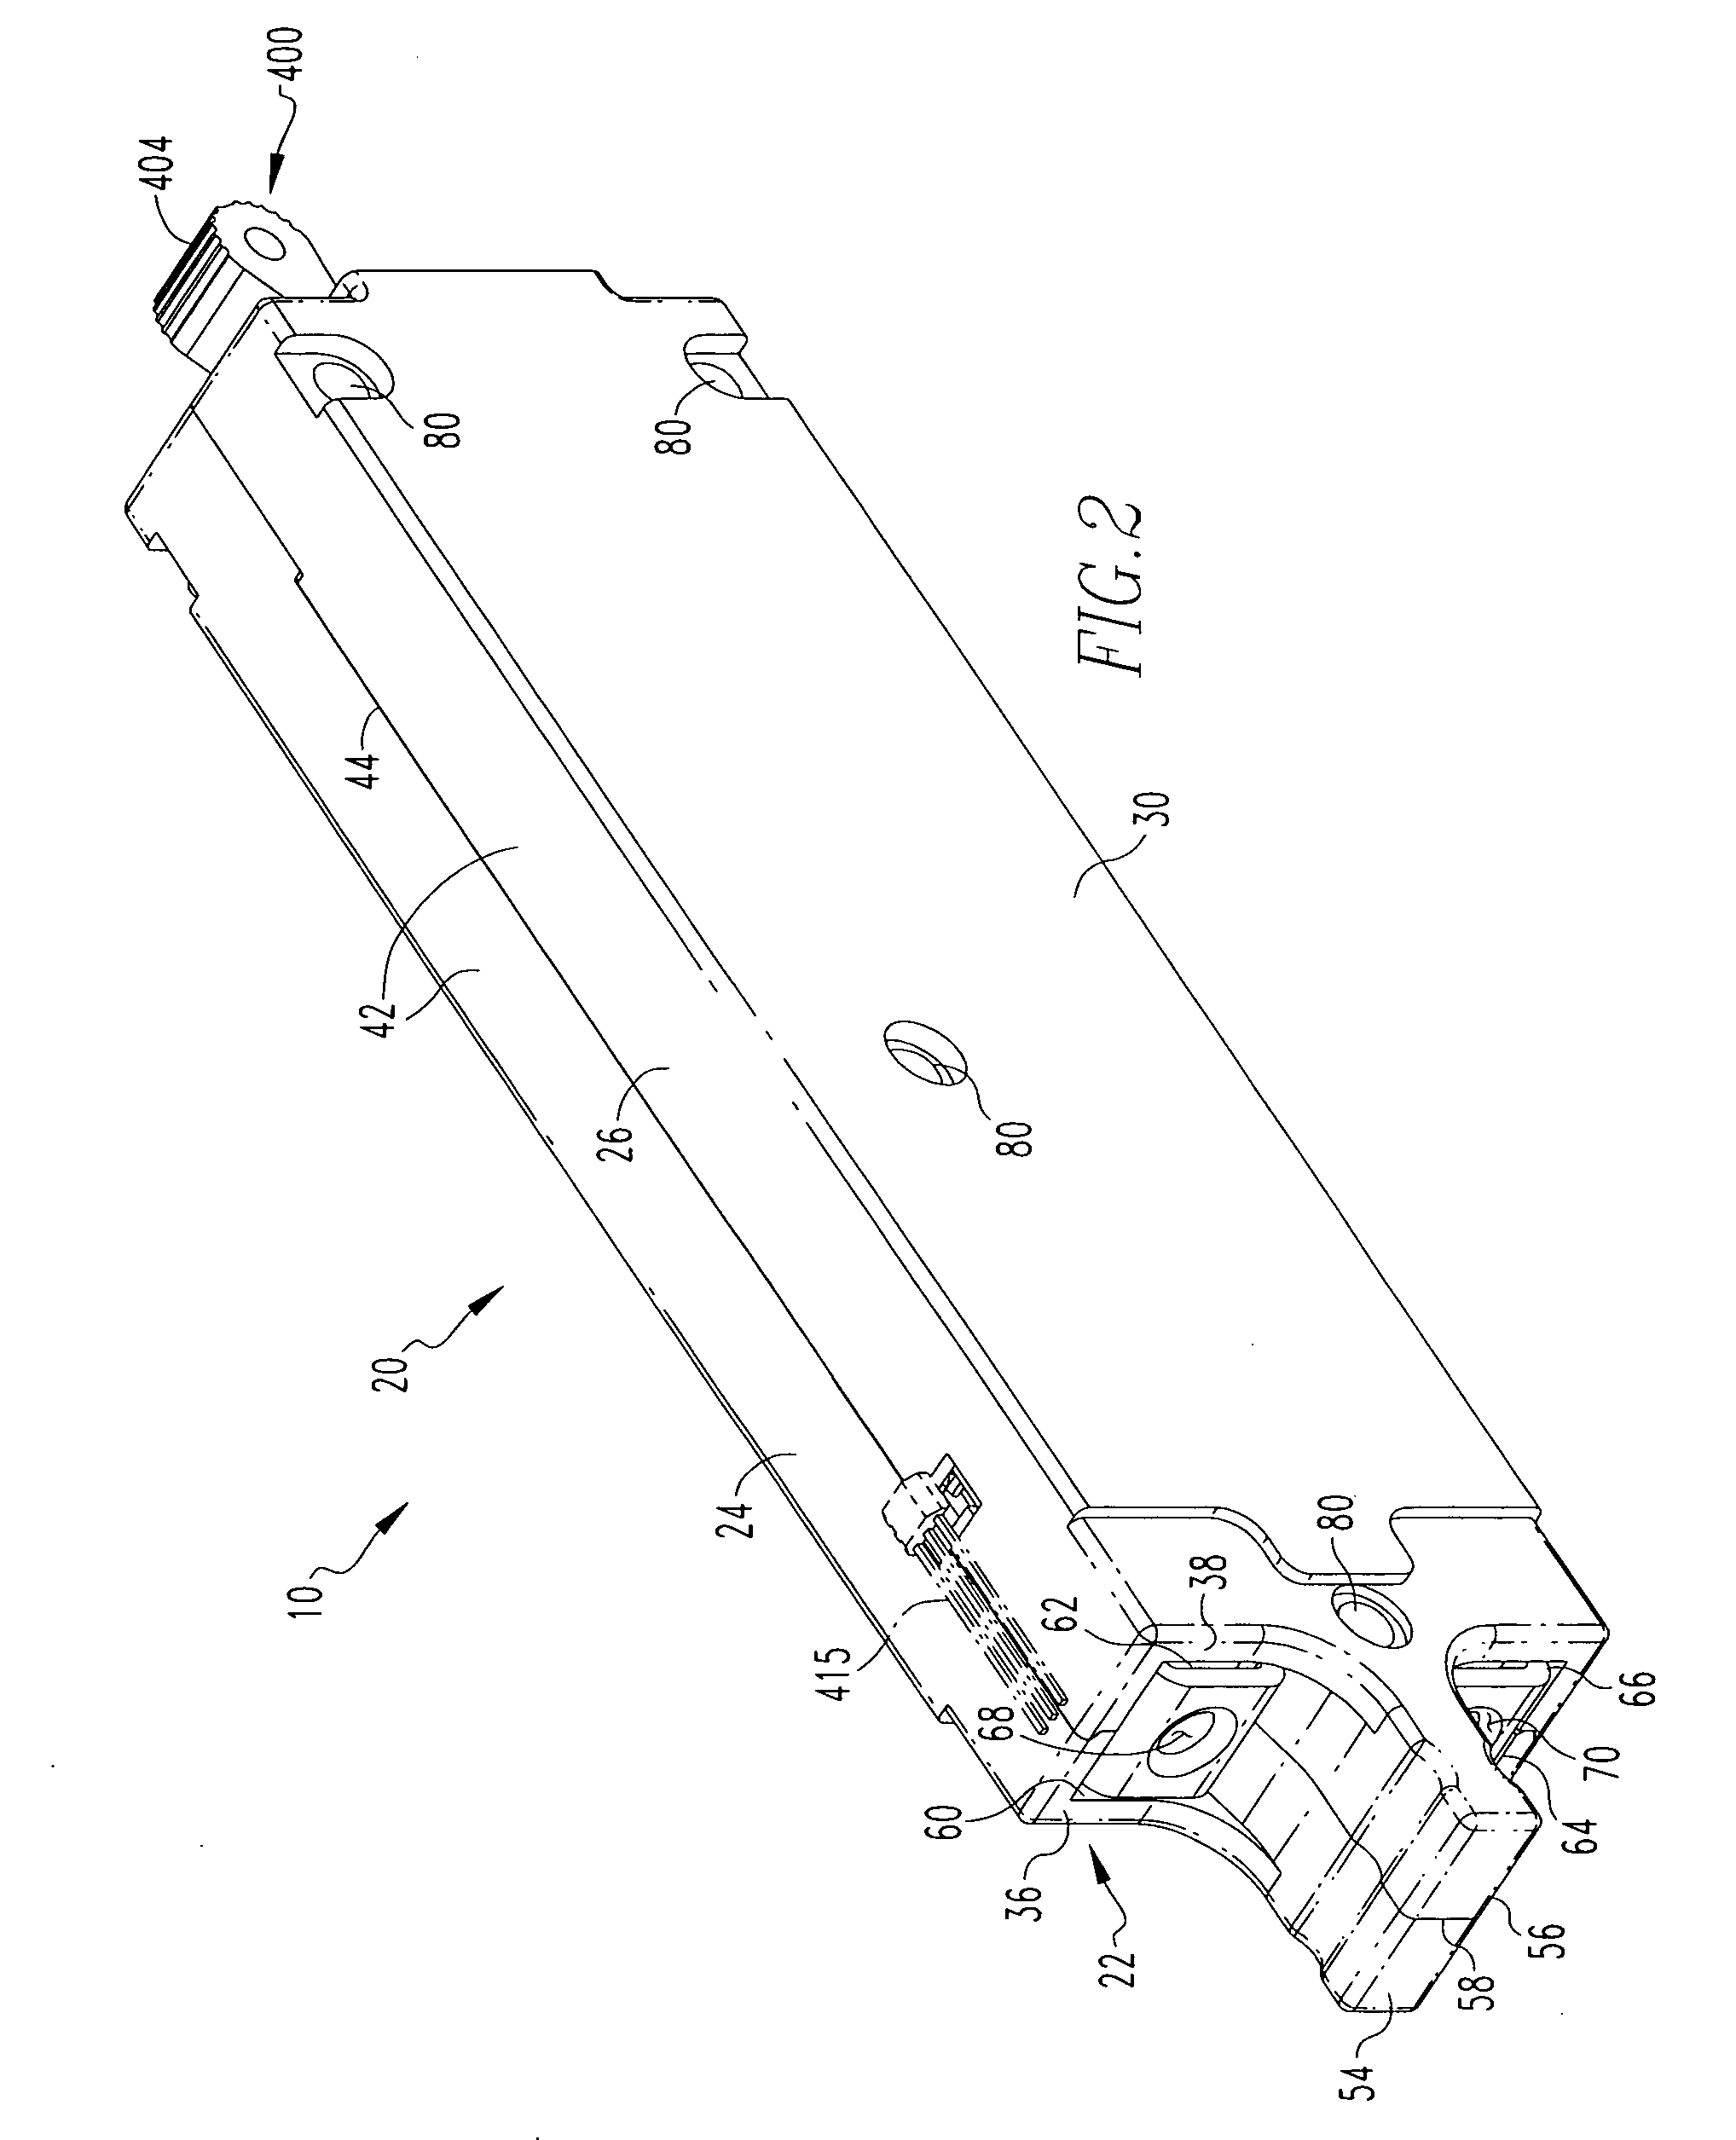 Handle assembly having an integral slider therefor and electrical switching apparatus employing the same